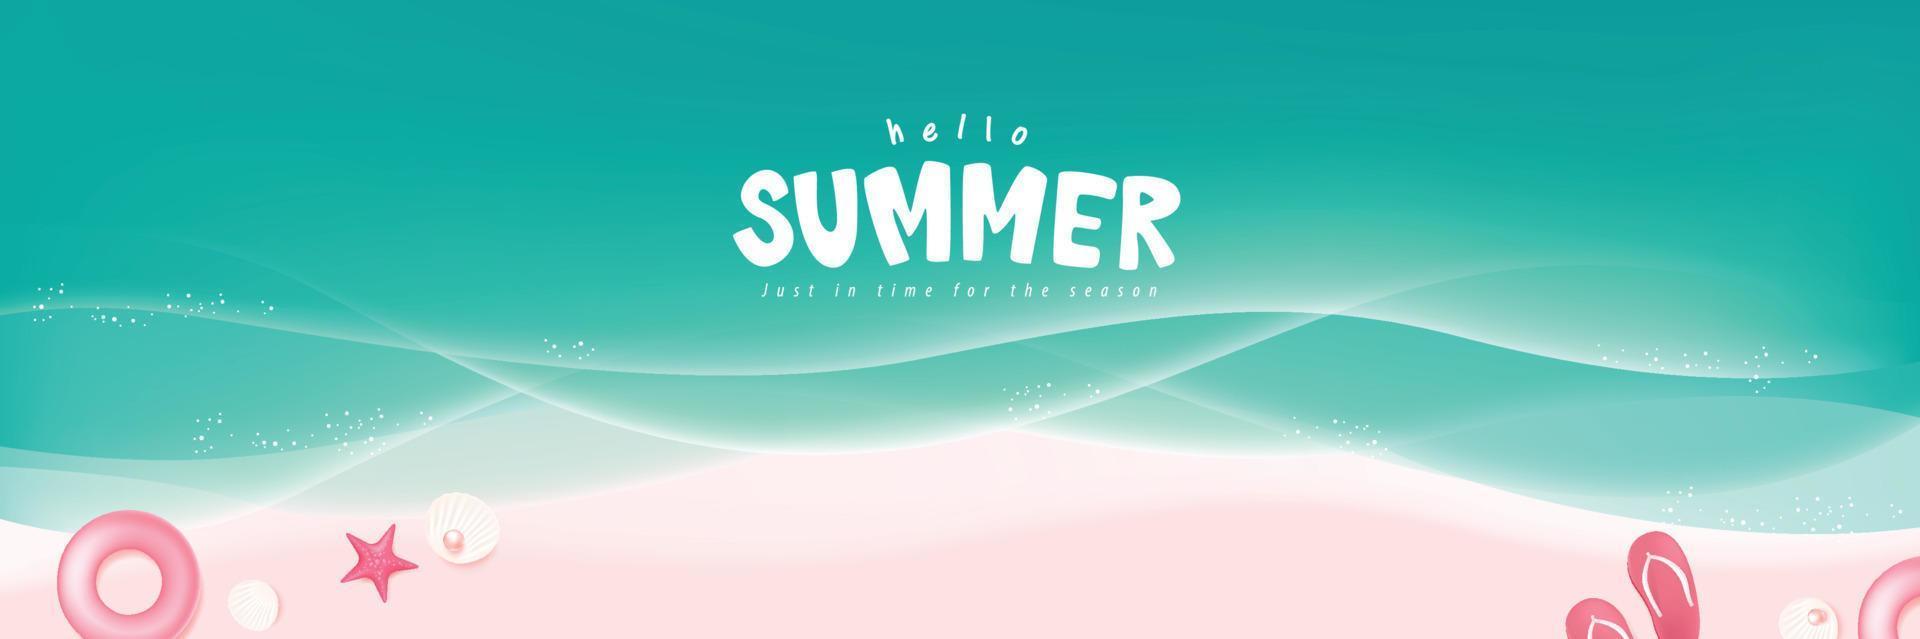 Blue sea and beach summer banner background with ripple and beach decorations vector